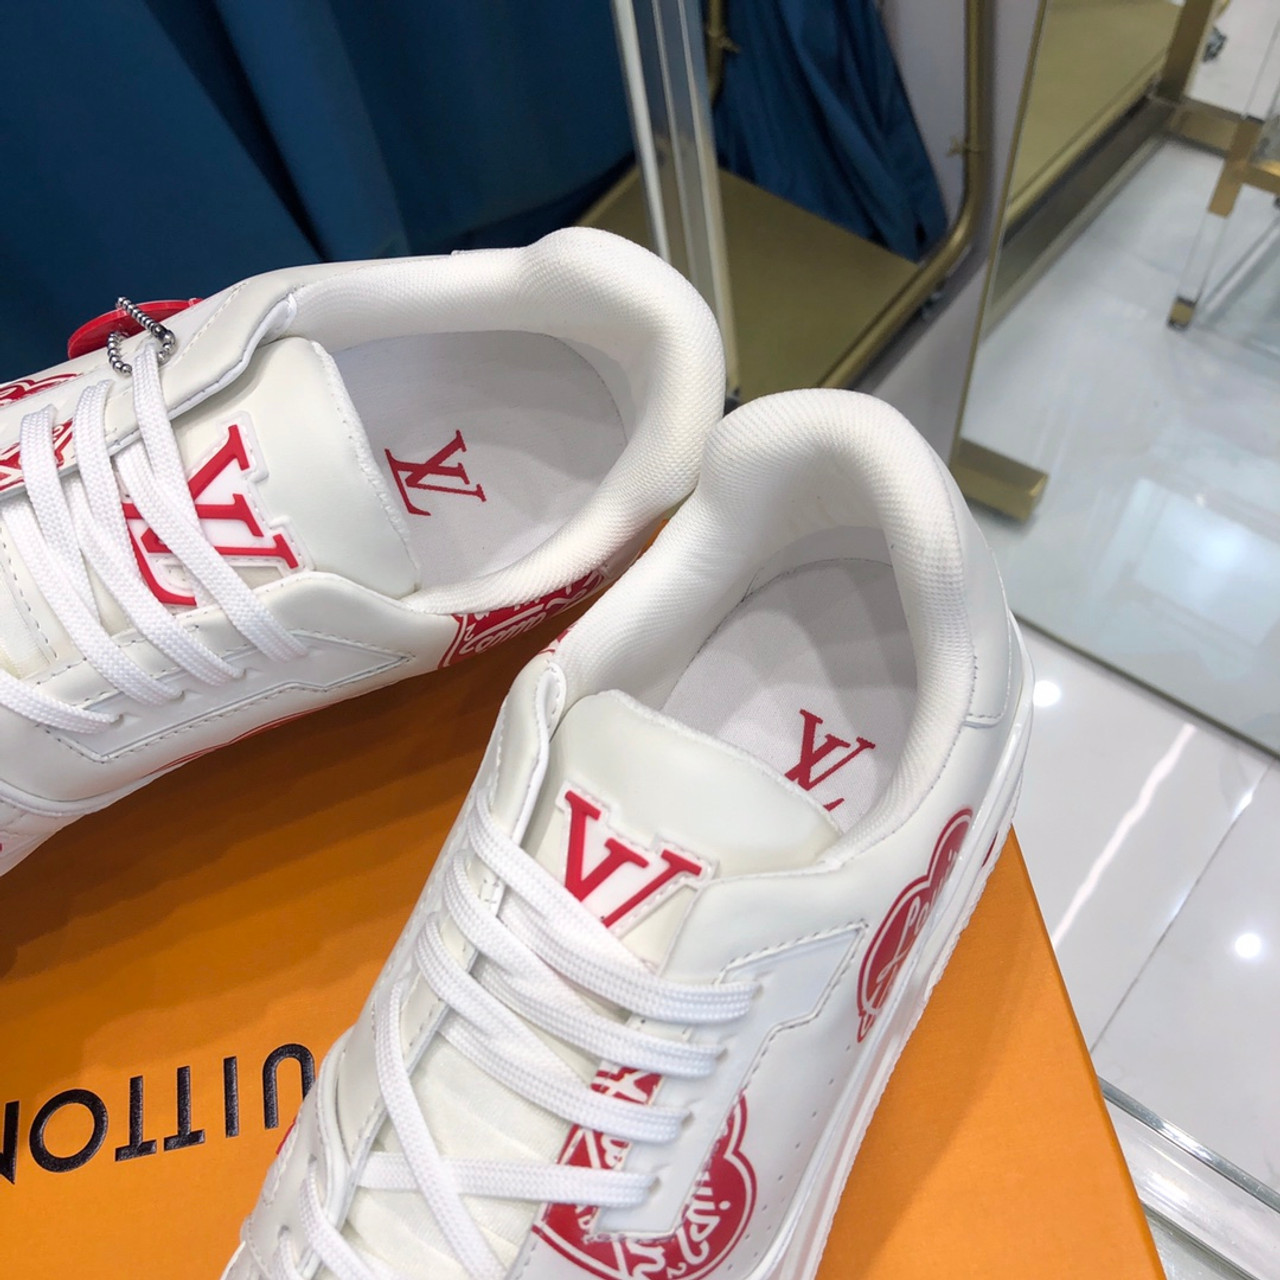 Wholesale Louis's Vuitton's Replica Lv's Balenciaga's Brand Gucci's  Designer Nike's Jordan's 4 Factory in China Online Store Adidas's Branded  Shoes 232e3 - China Shoes and Branded Shoe price